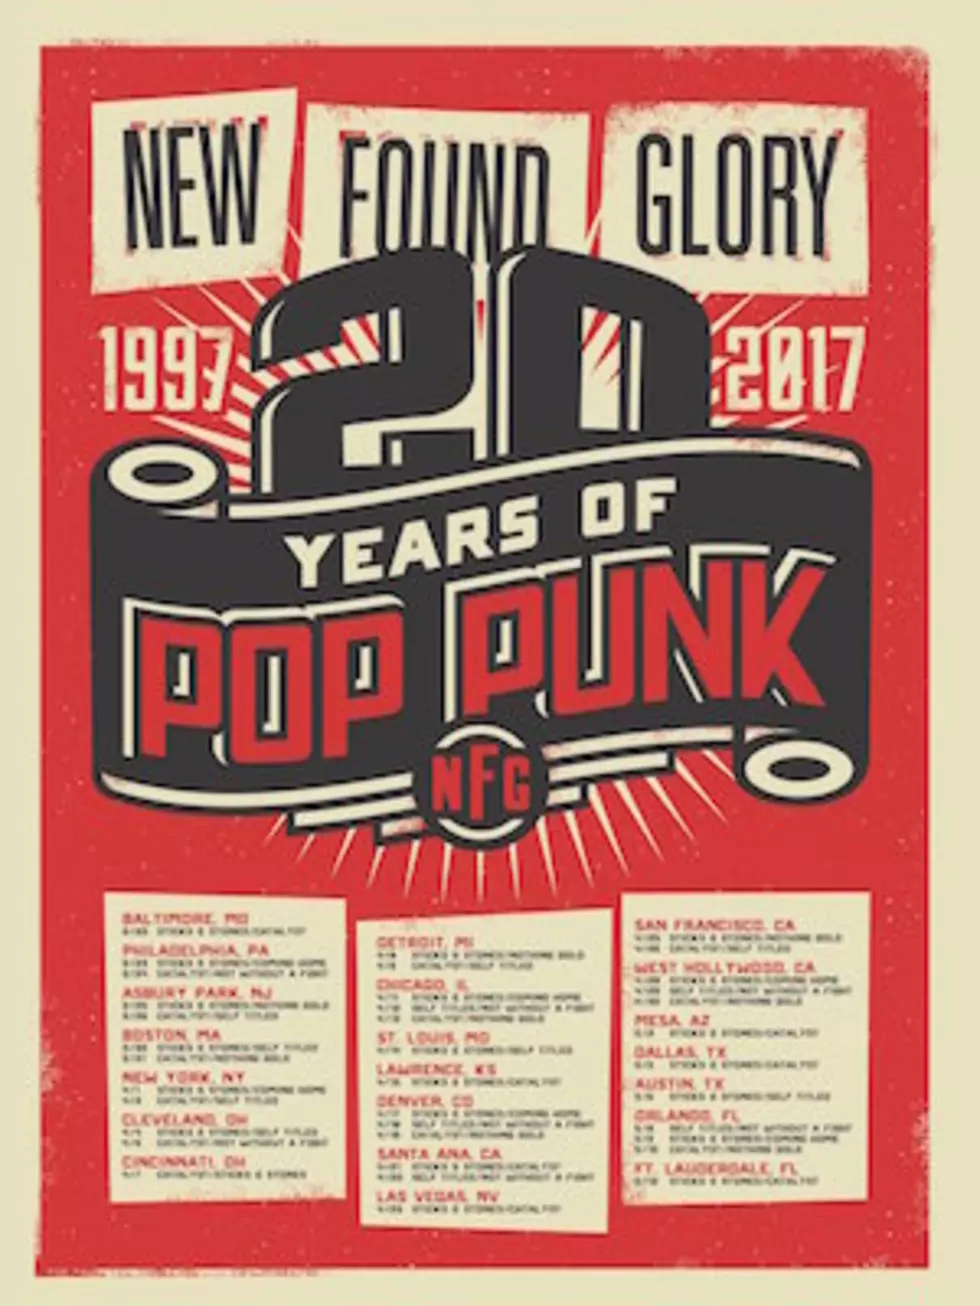 New Found Glory Playing Full Album Shows for 20th Anniversary Tour